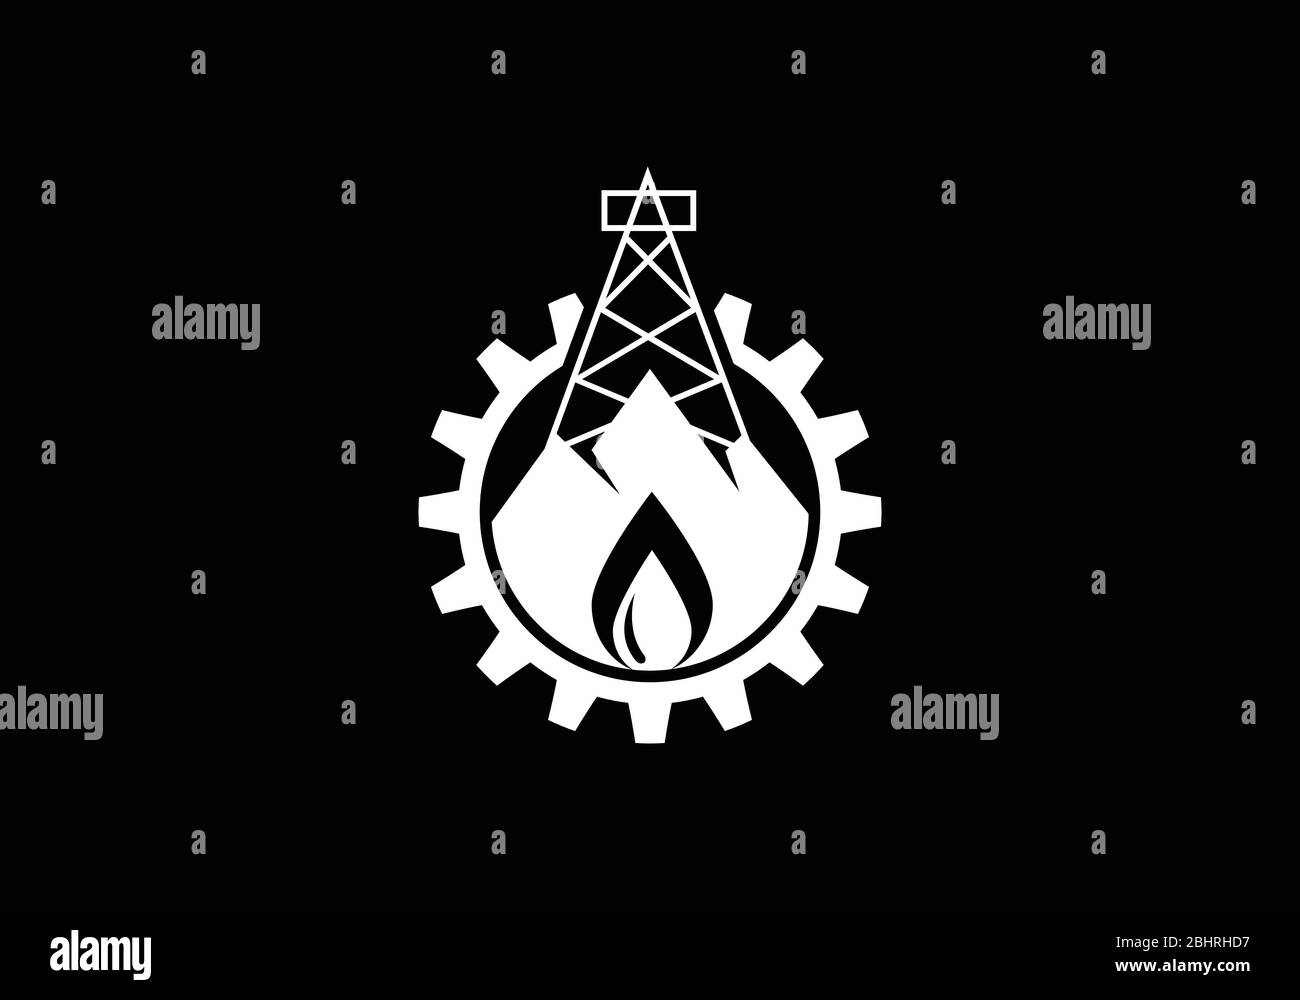 Fire flame icon in a shape of drop. Oil and gas industry logo design concept. Stock Vector